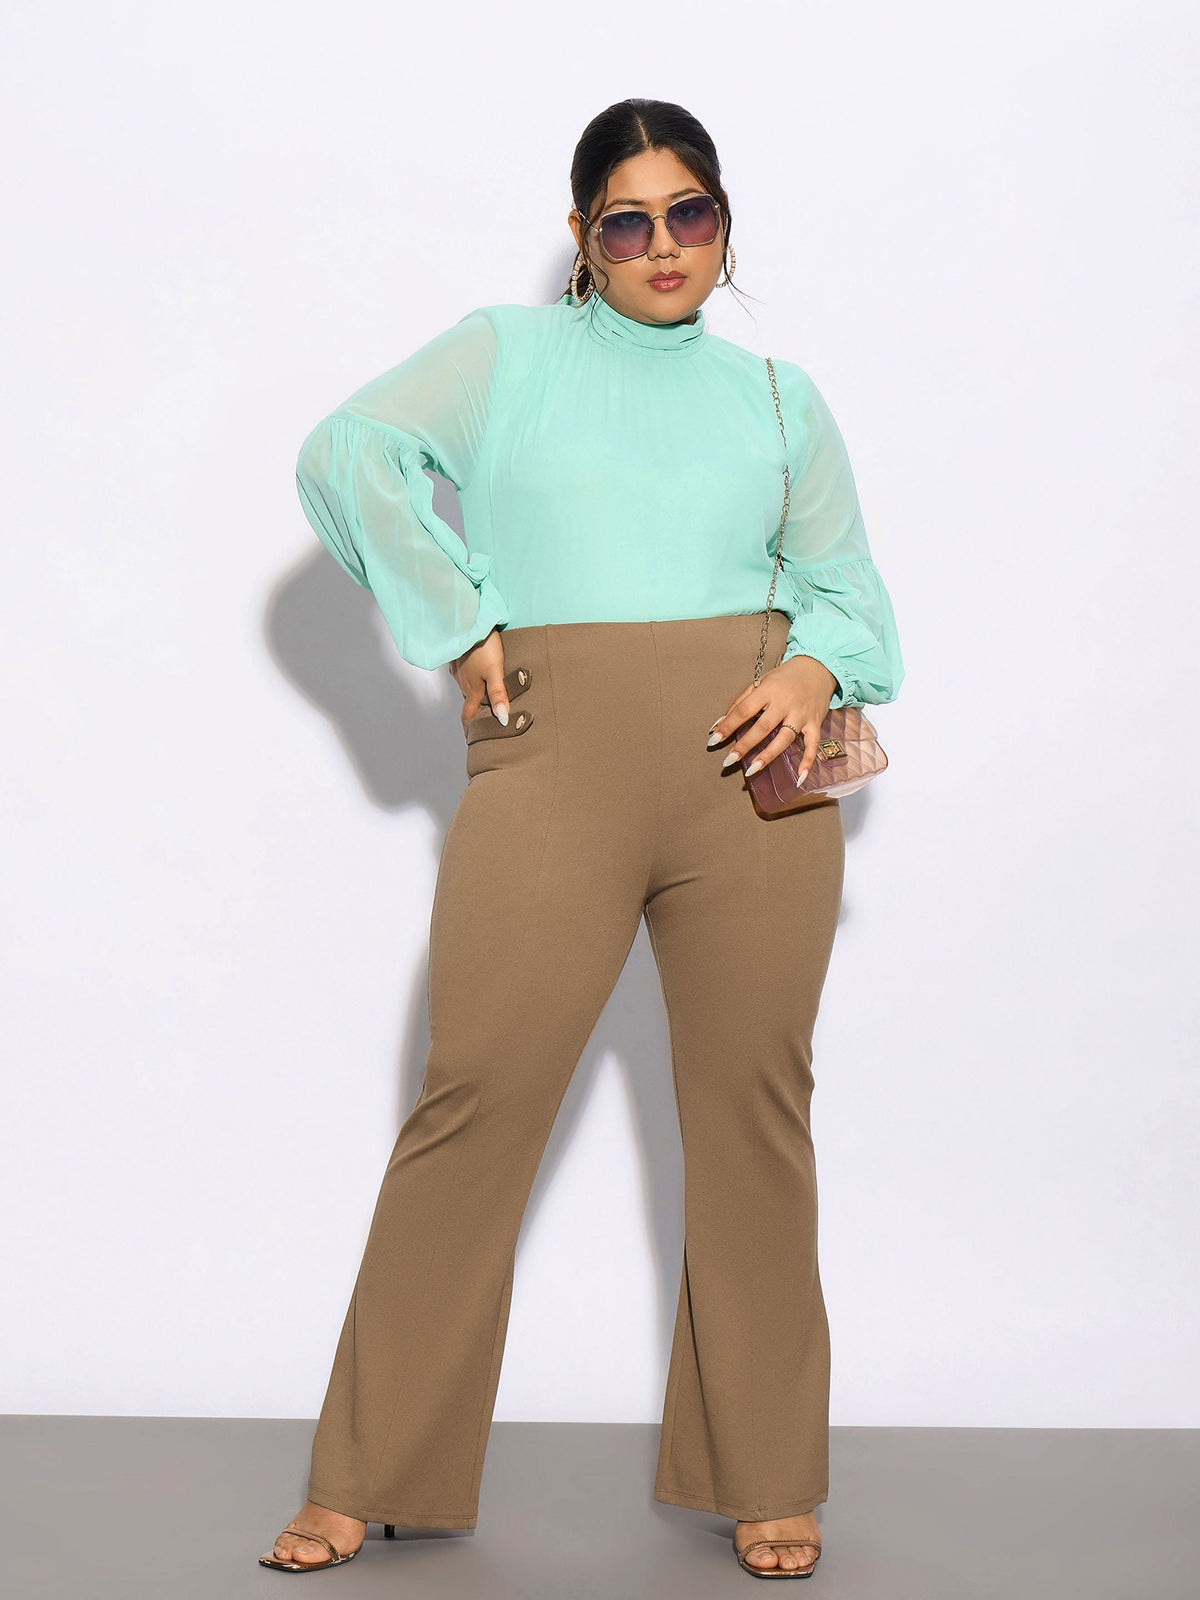 New in. Wide leg pants. | Wide leg pants outfit, Brown wide leg pants  outfit, Spring outfits casual